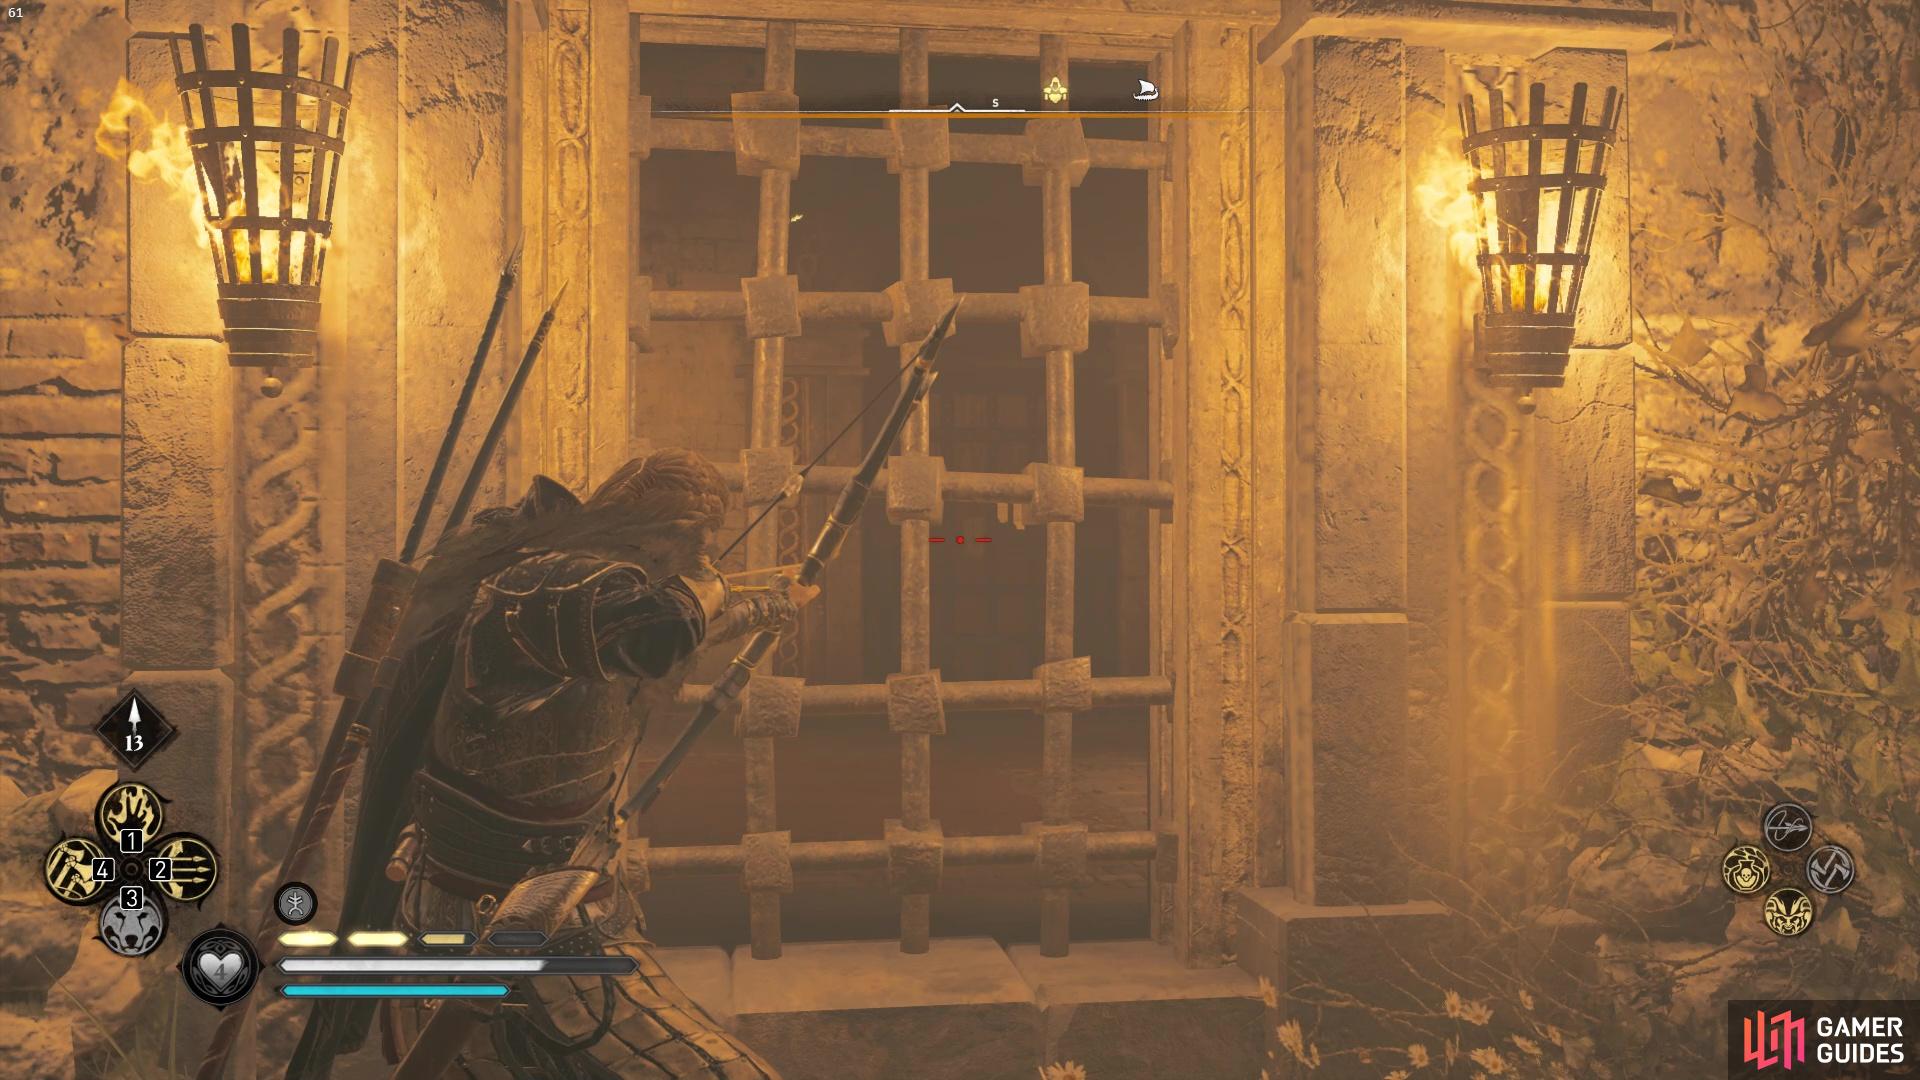 youll need to shoot a lock on a barred door from the outside of the church to reach the room where the armor is kept. 